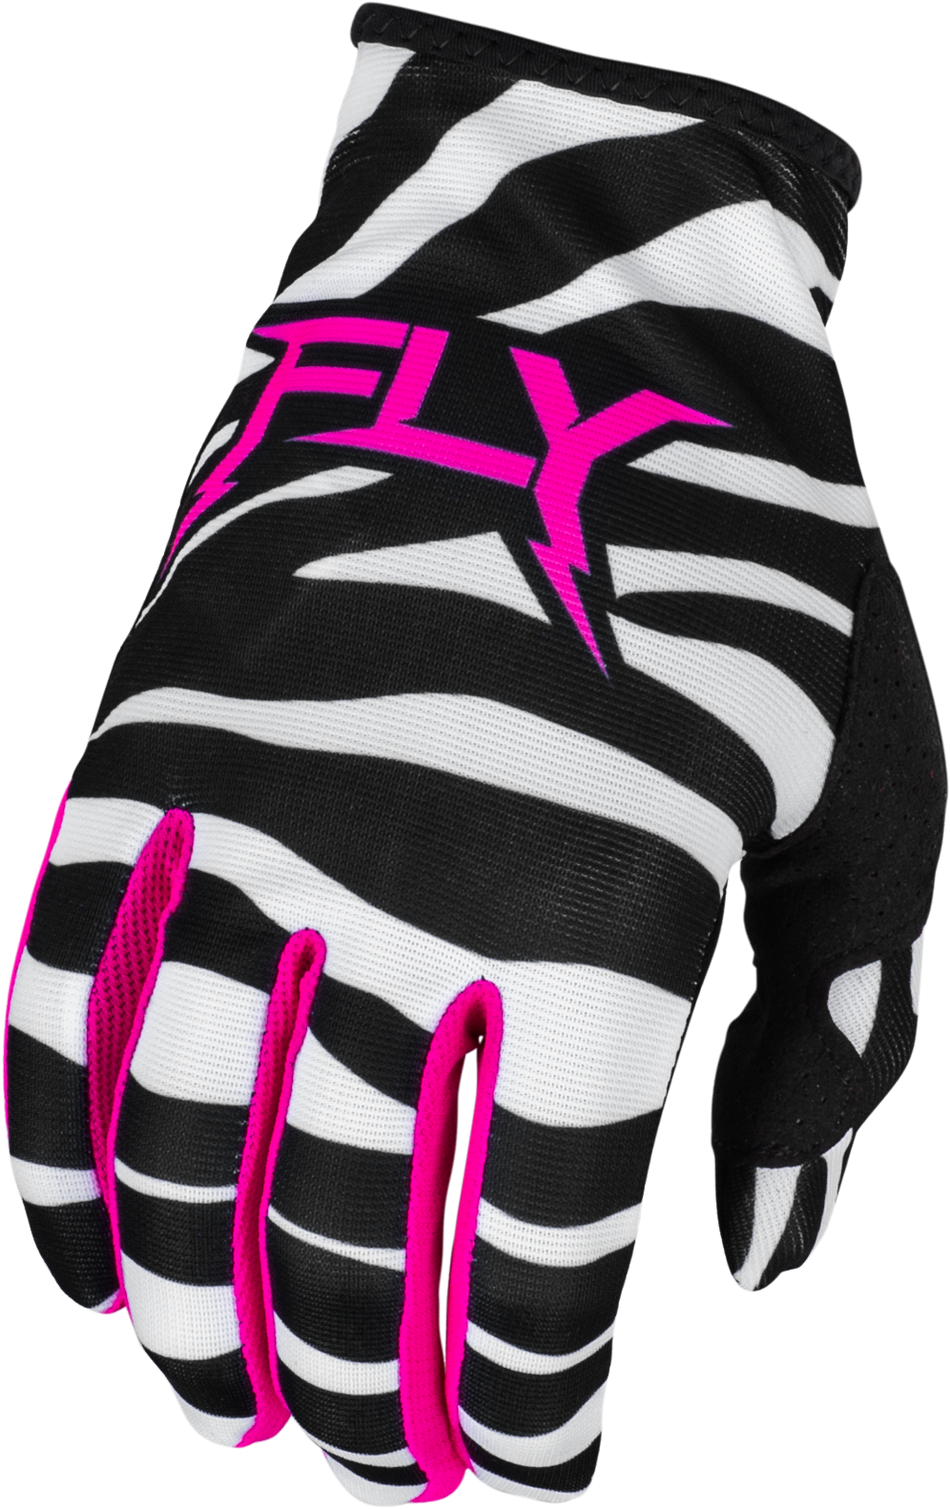 FLY RACING Lite Uncaged Gloves Black/White/Neon Pink Md 377-741M